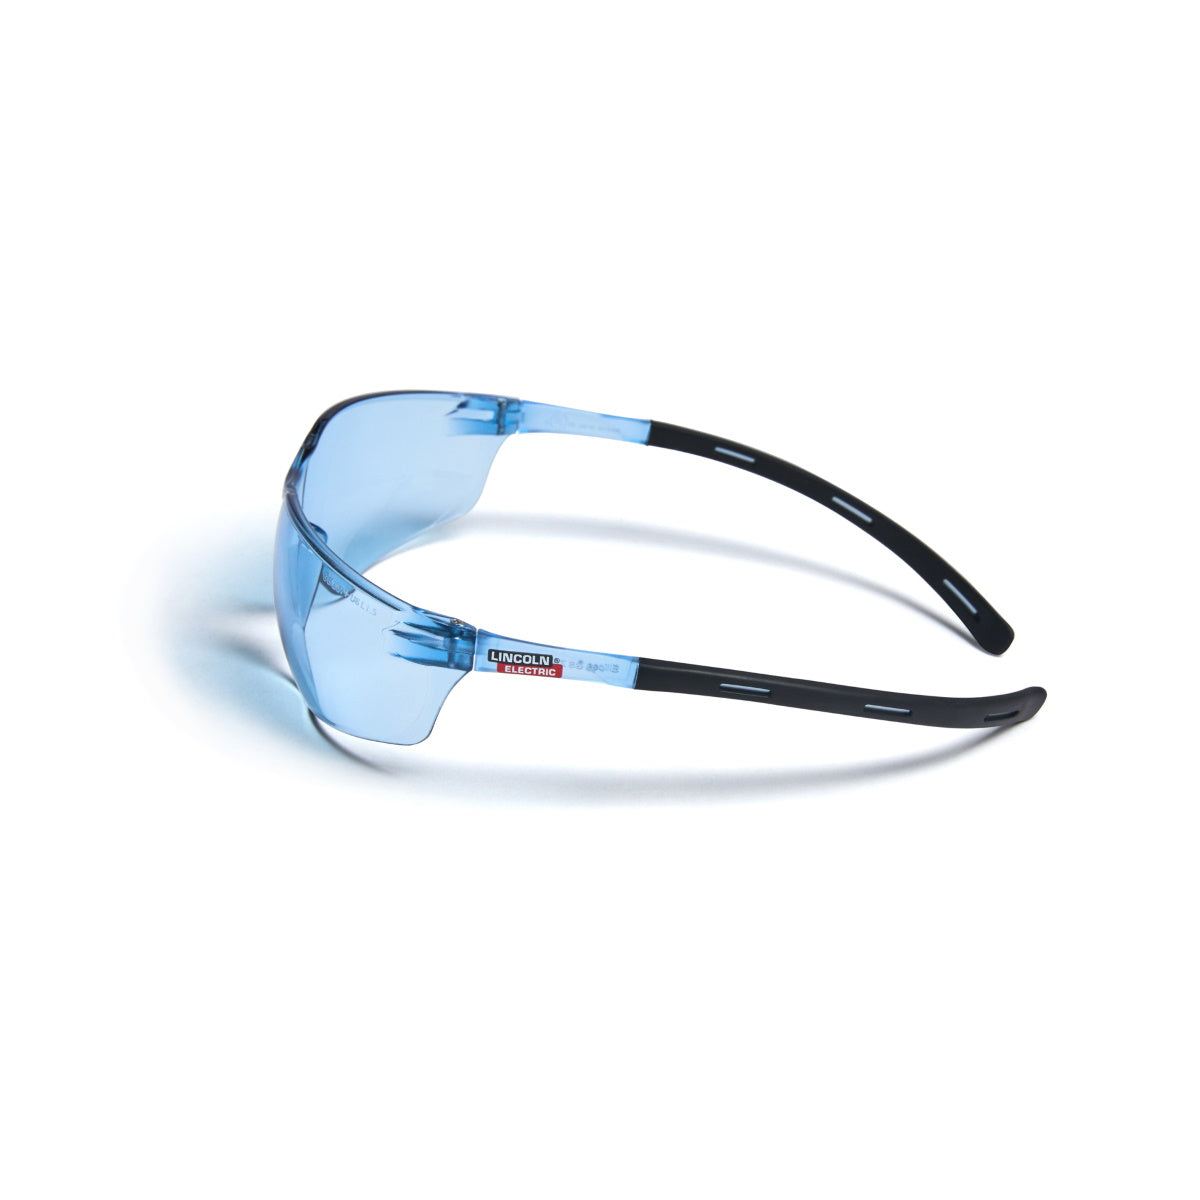 Lincoln Axilite Blue Anti-Fog/Scratch Safety Glasses (K4675-1)